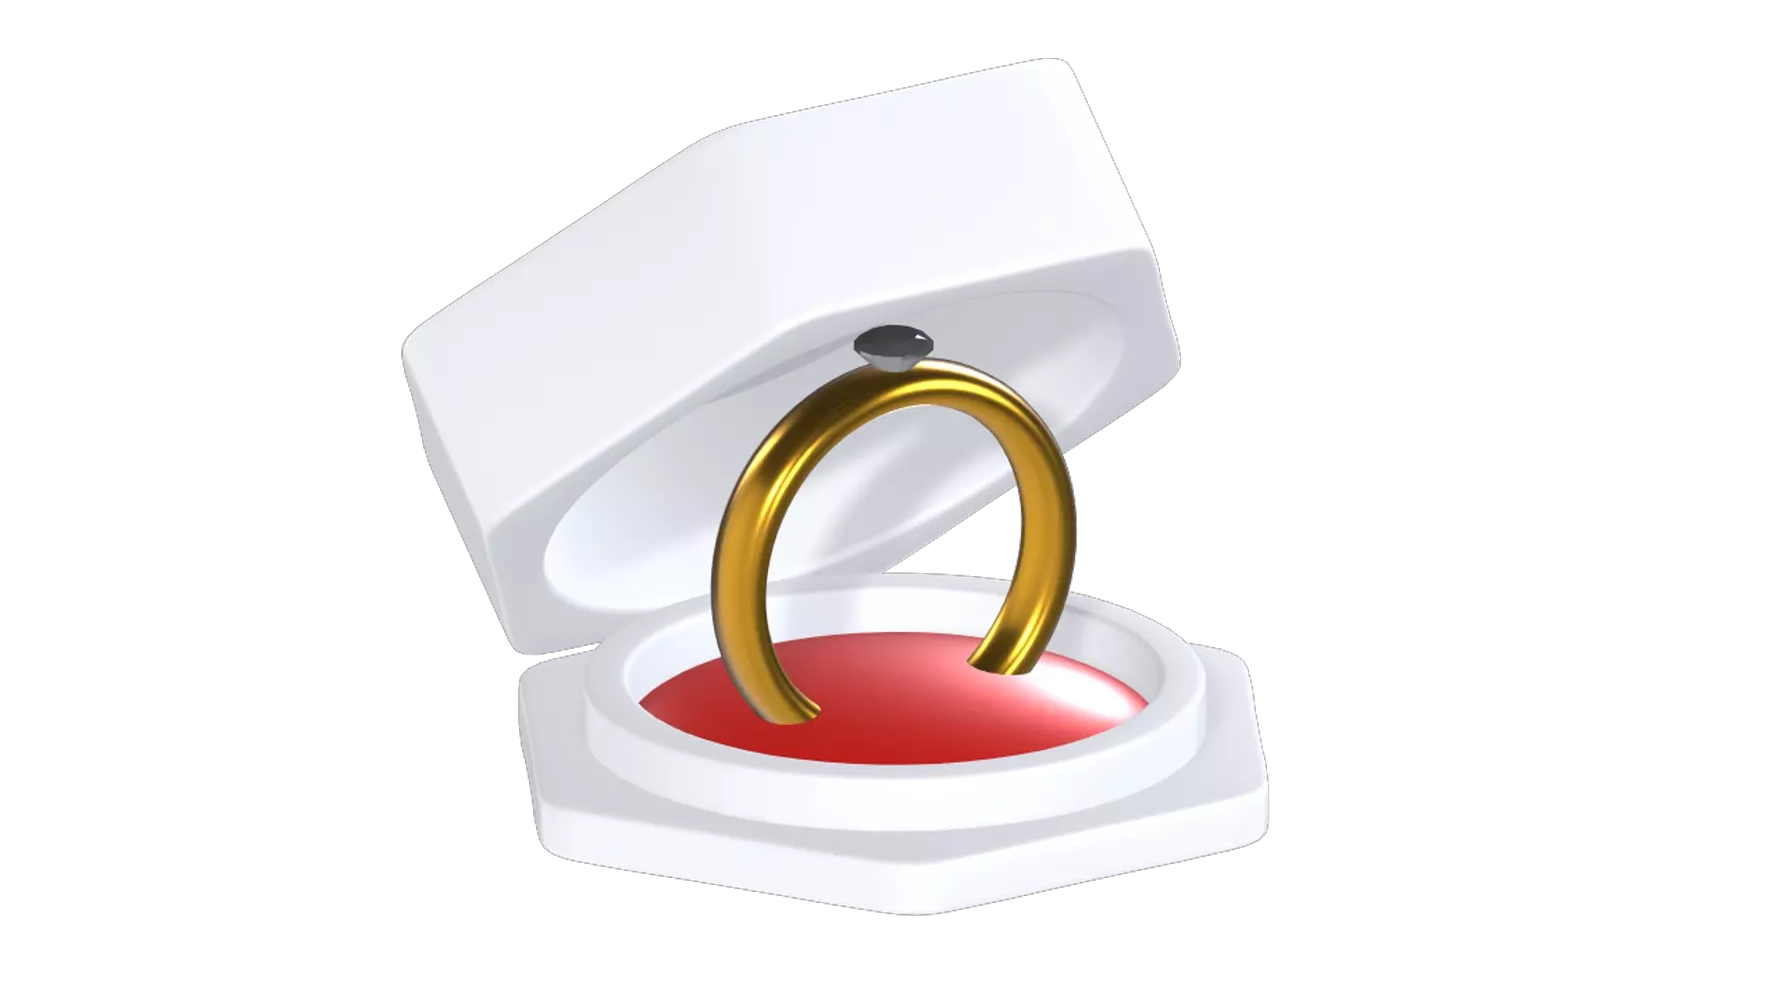 Ring Box 3D Graphic